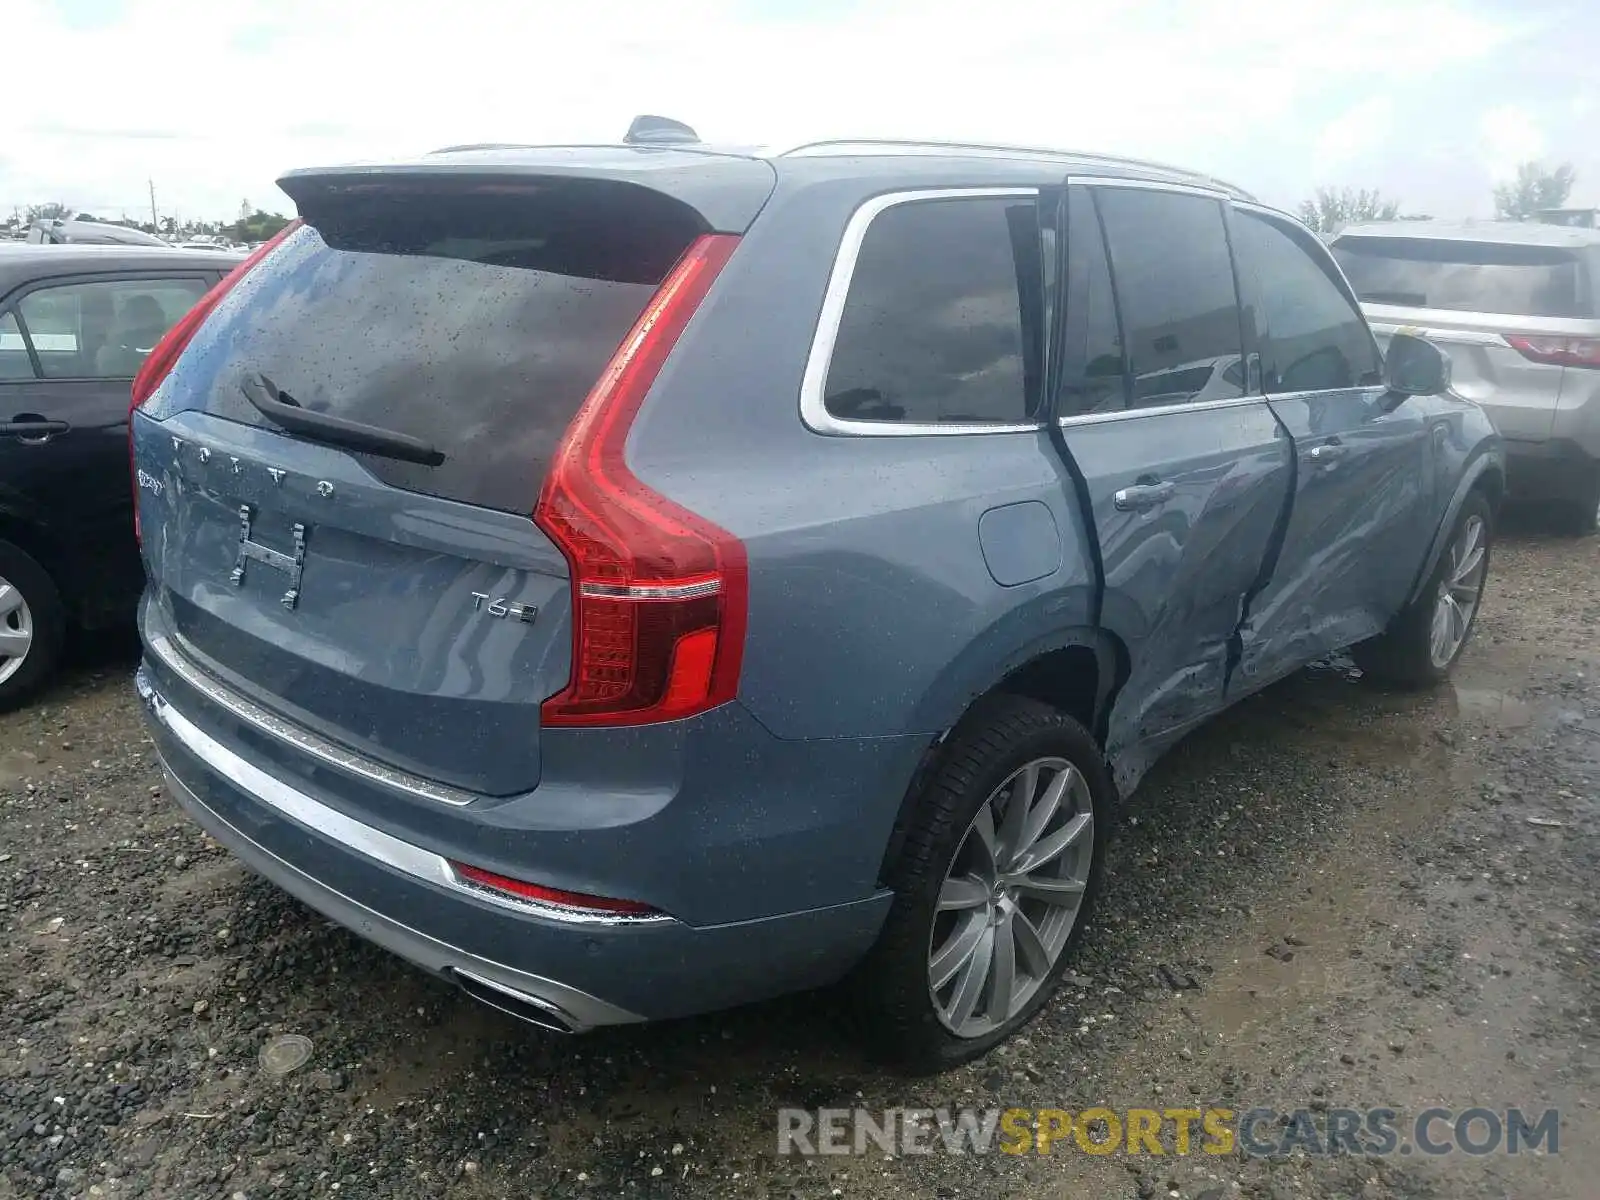 4 Photograph of a damaged car YV4A221LXL1552457 VOLVO XC90 T6 IN 2020